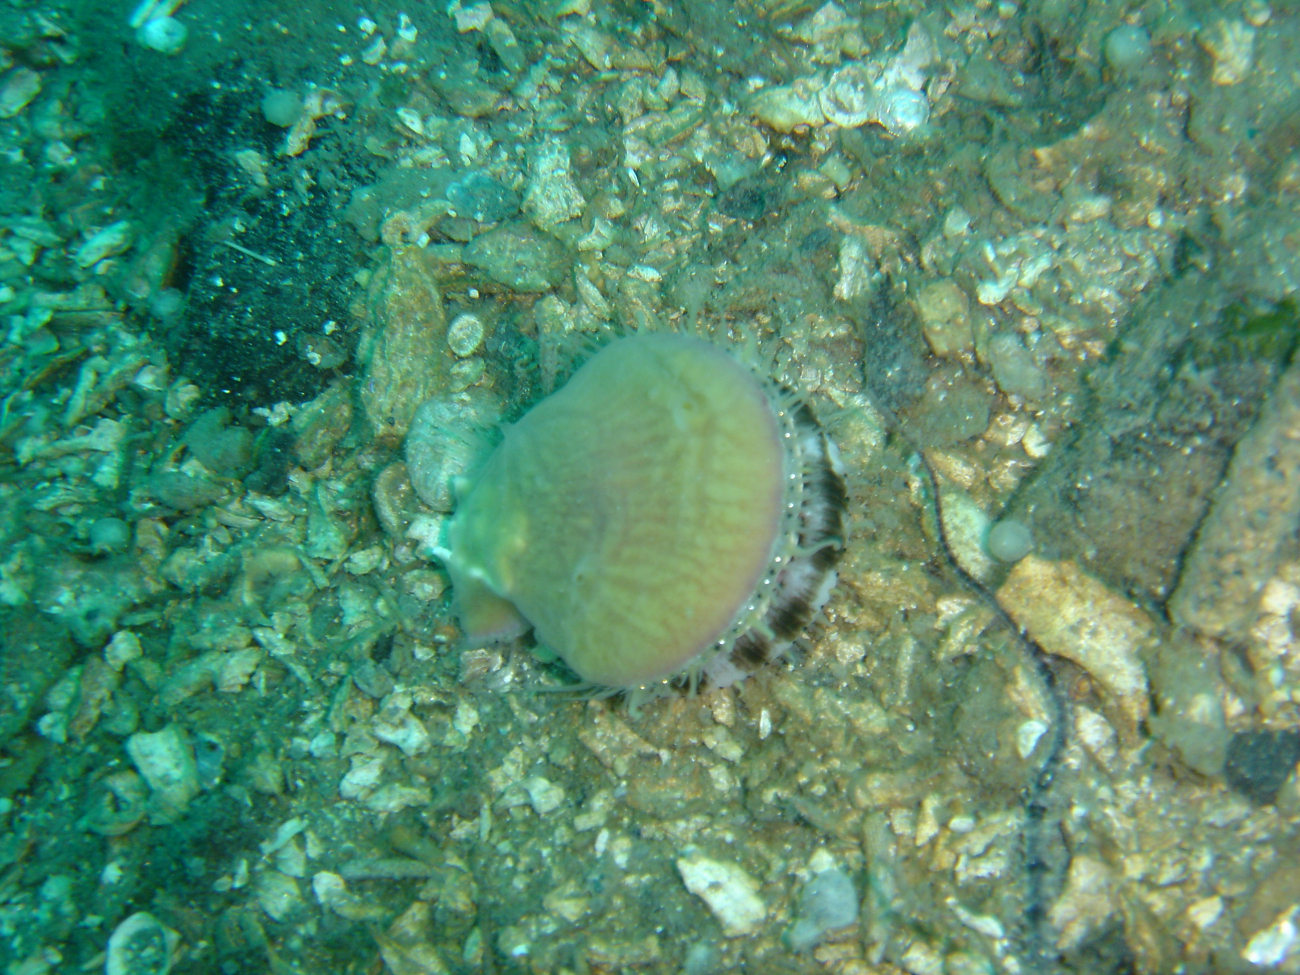 Scallop observed on a dive in Three Saints Bay